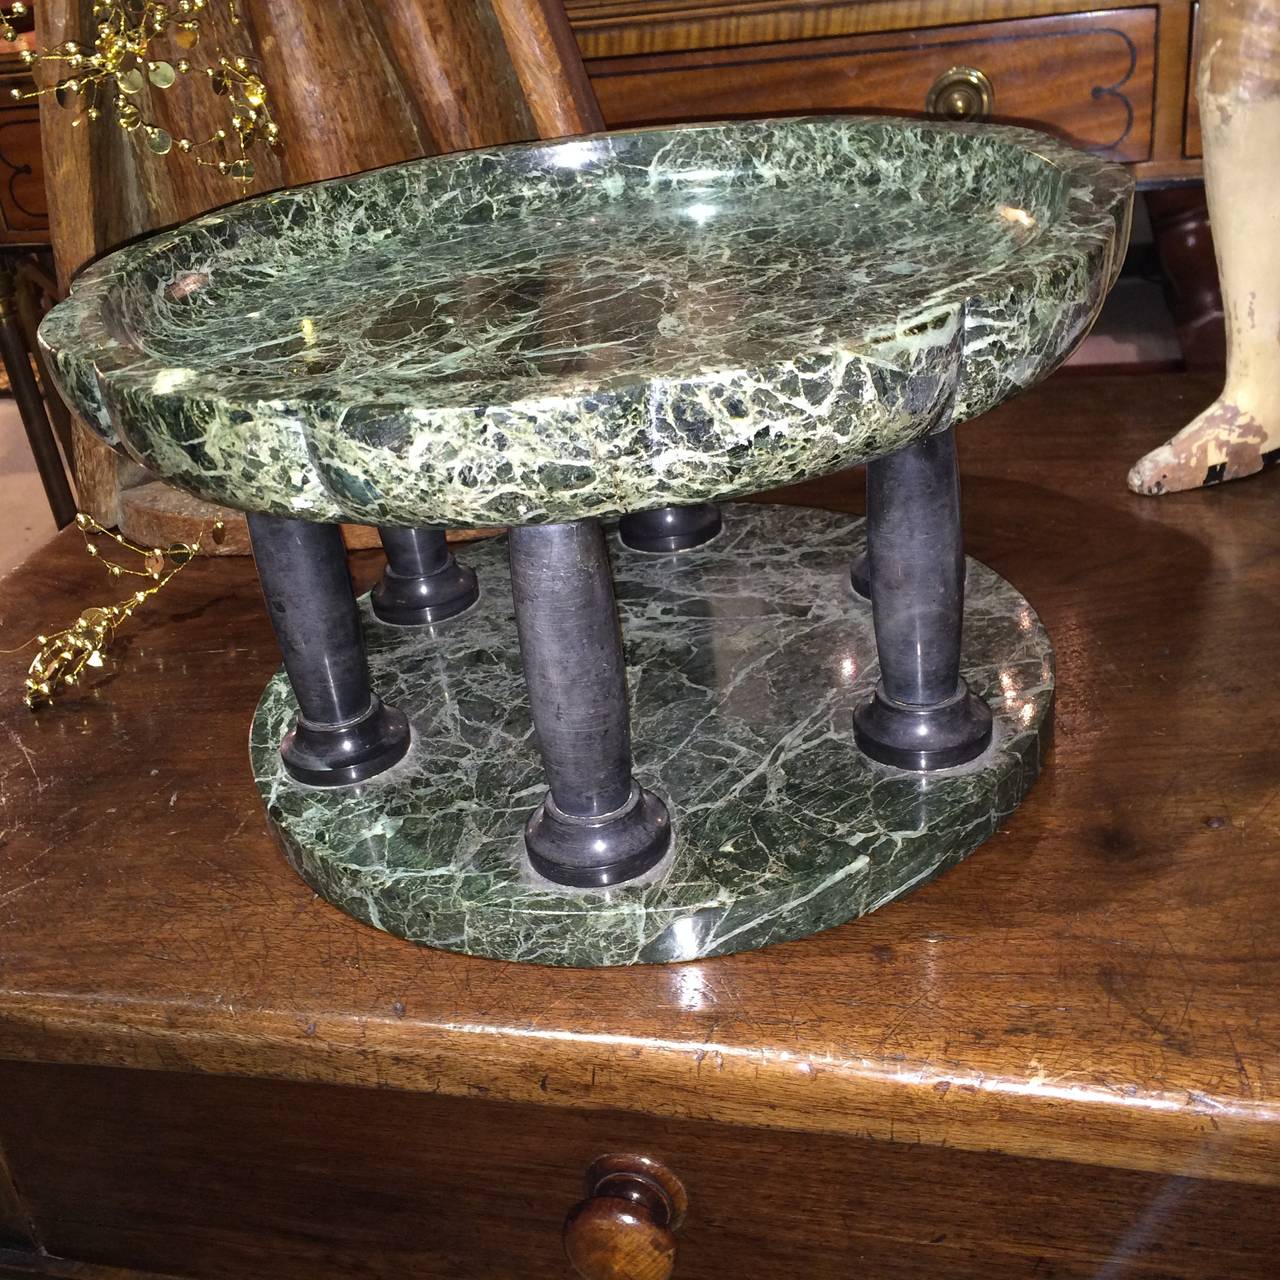 An Italian hand-carved 'Antico Verde' and black marble tazza, the scalloped top supported by six columns. A distinctive table centerpiece in the Neoclassical style.